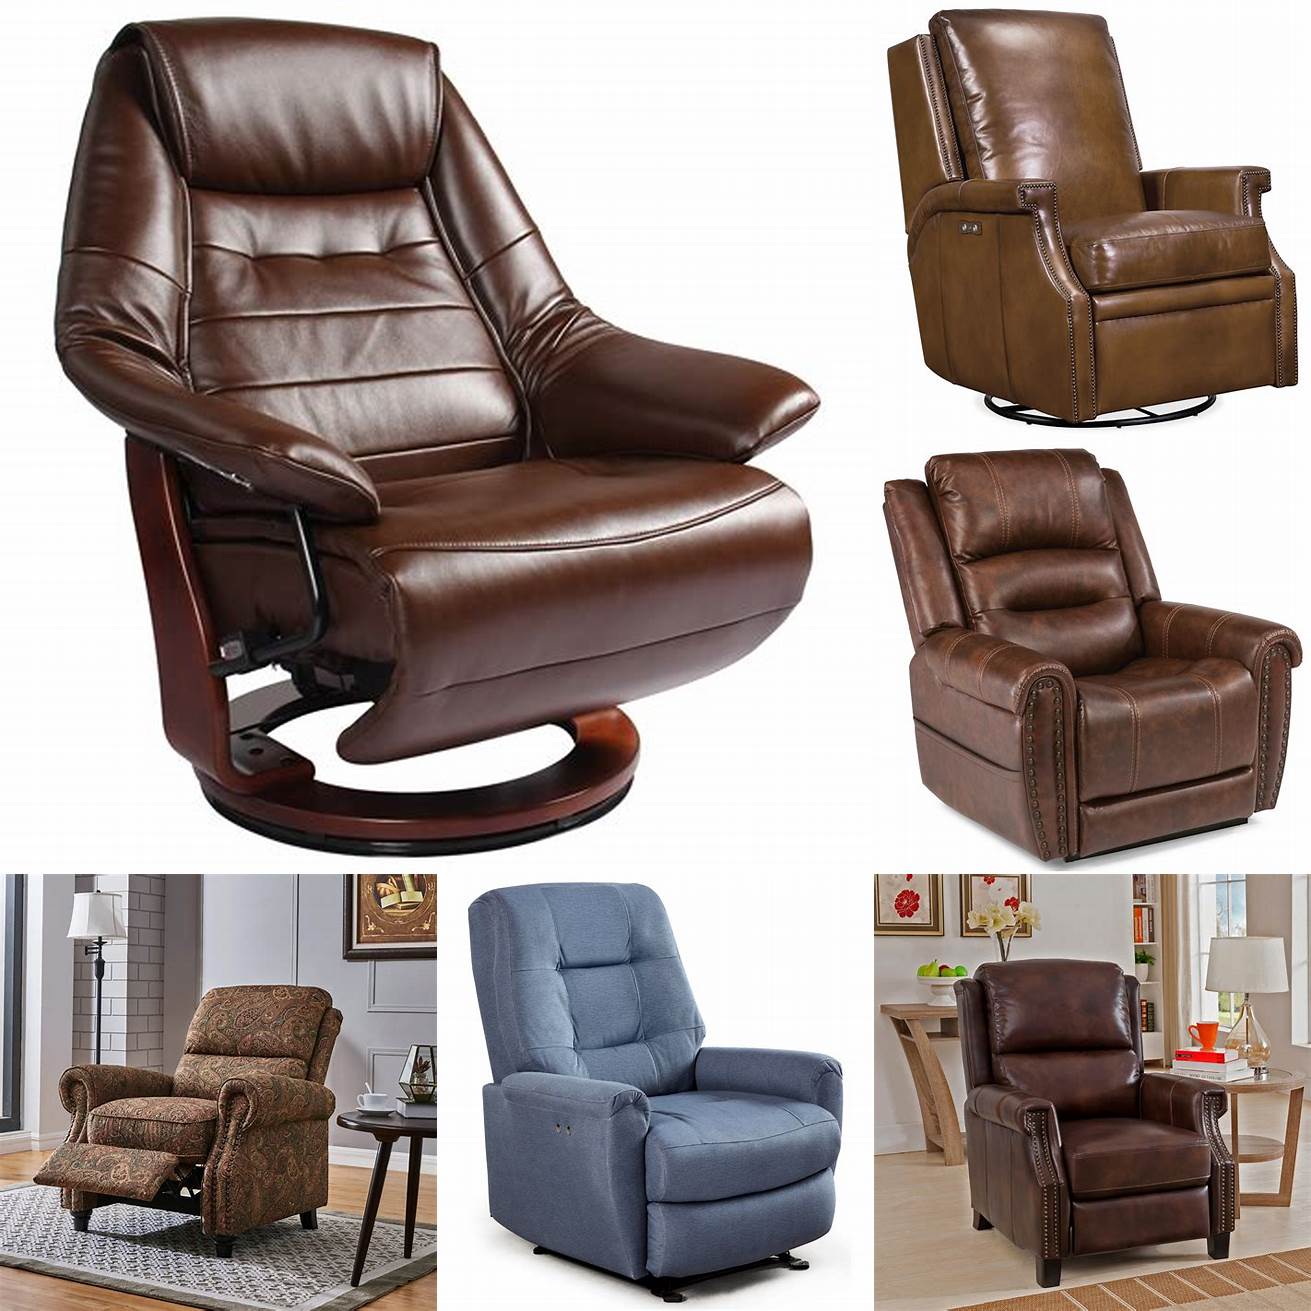 Chairs and recliners